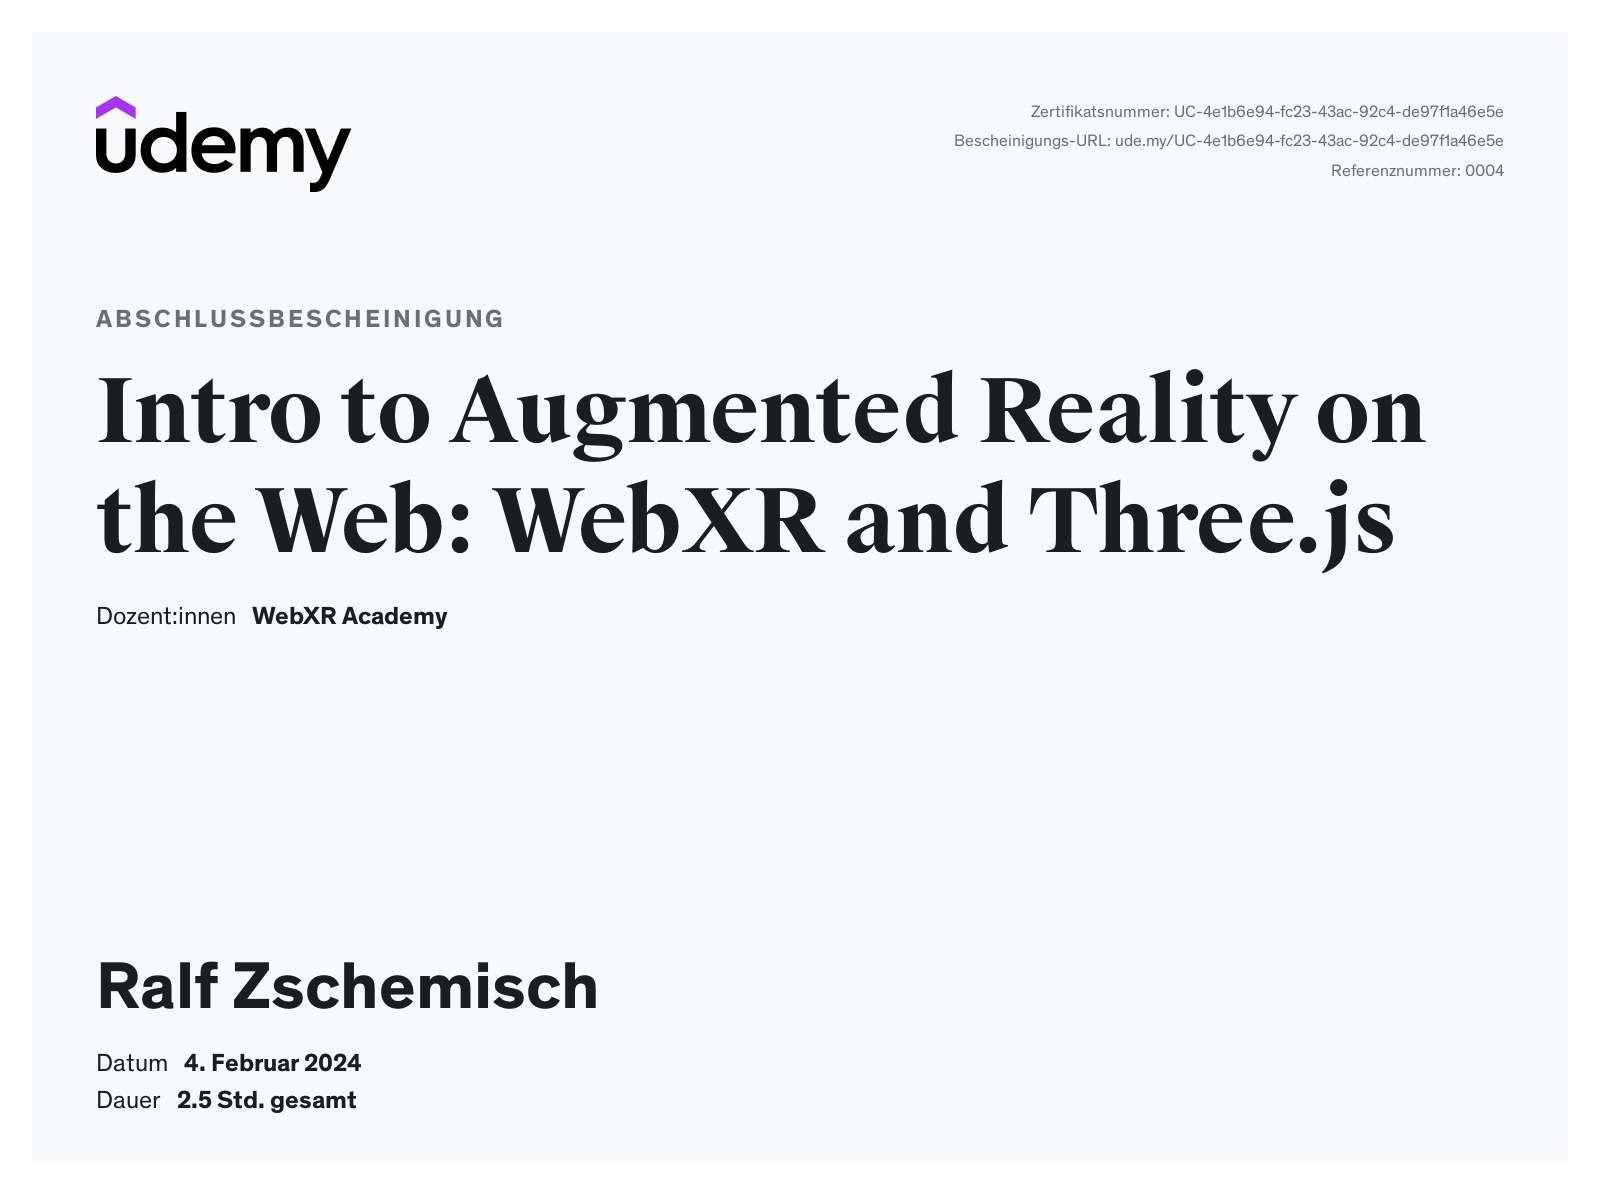  Intro to Augmented Reality on the Web: WebXR and Three.js 